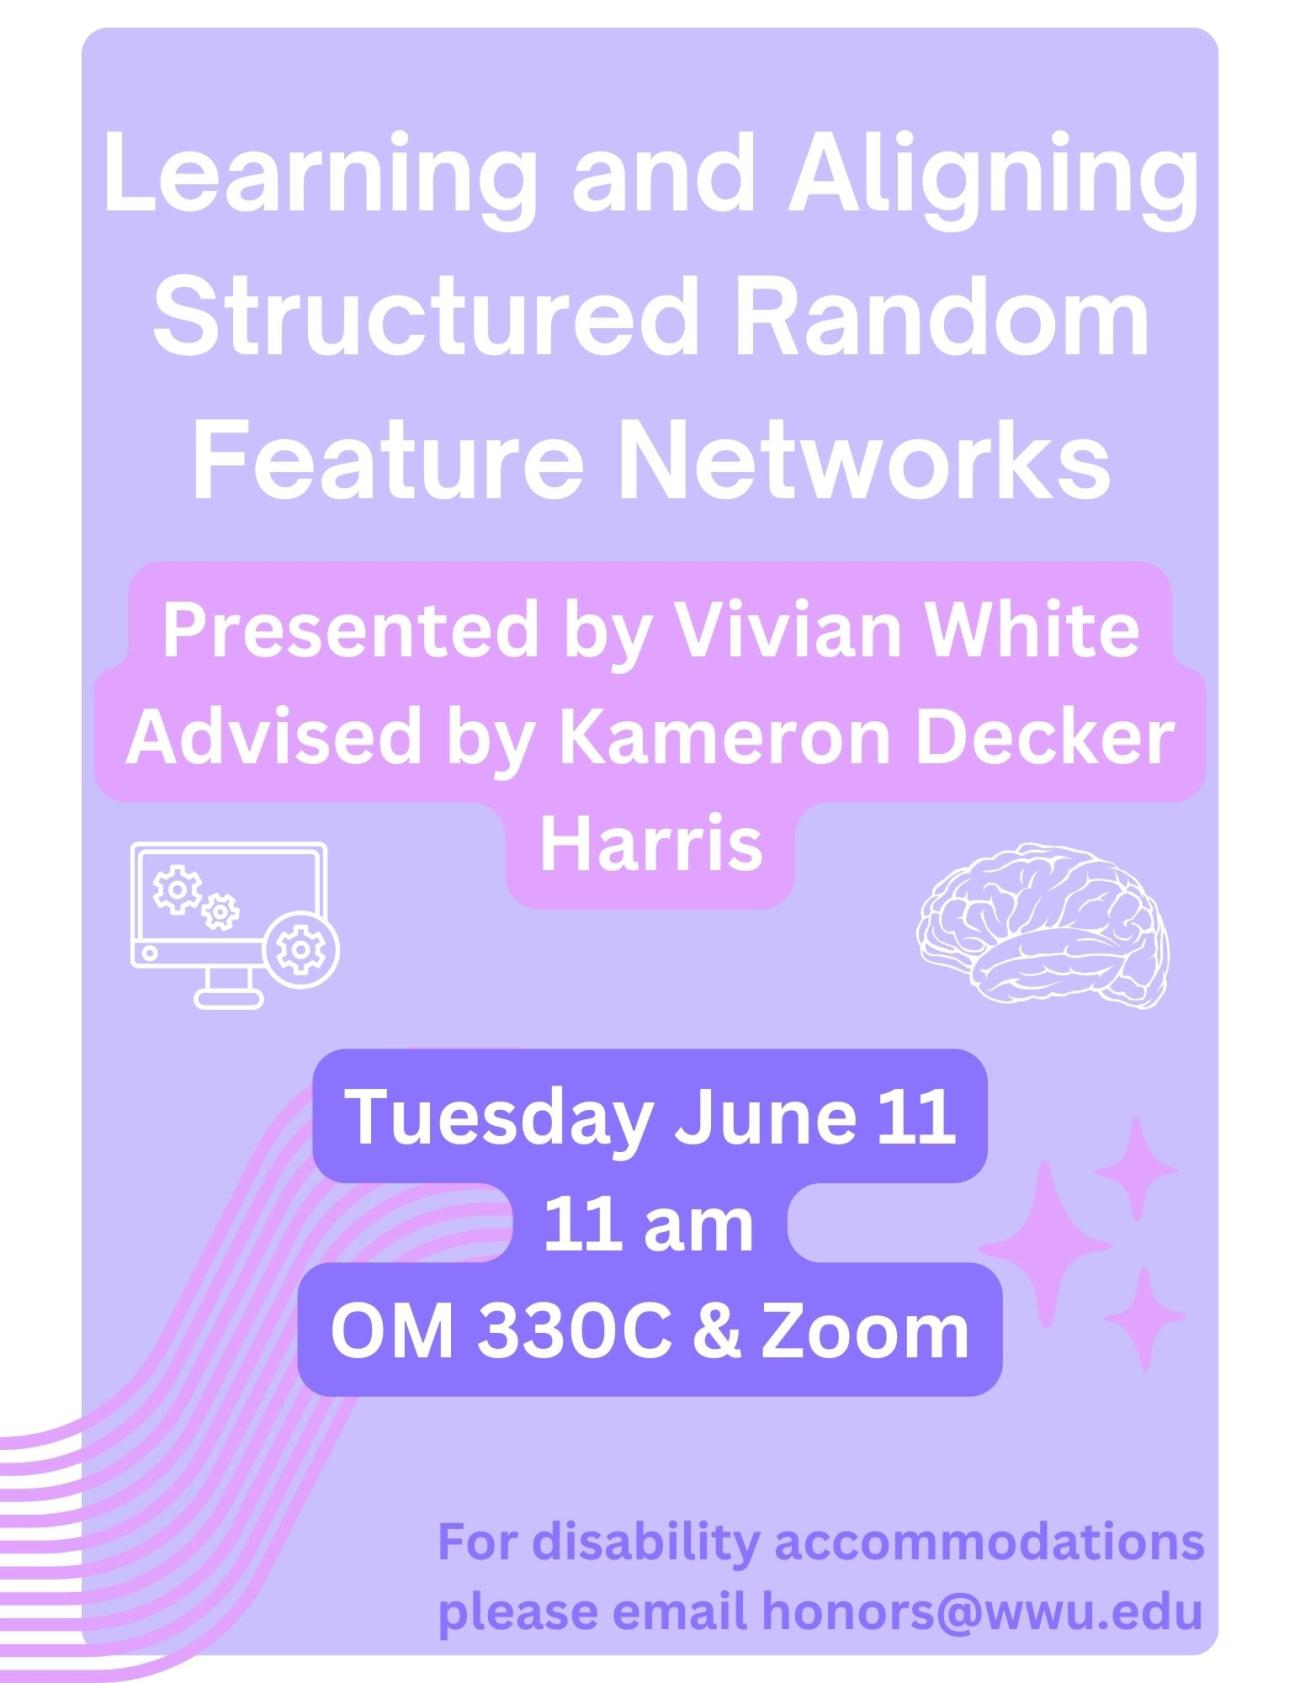 A pink and purple poster with an icon of a brain and a computer. The text reads "Learning and Aligning Structured Random Feature Networks. Presented by Vivian White. Advised by Kameron Decker Harris. Tuesday June 11. 11 AM. OM 330C and Zoom. For disability accommodations, please email honors@wwu.edu"